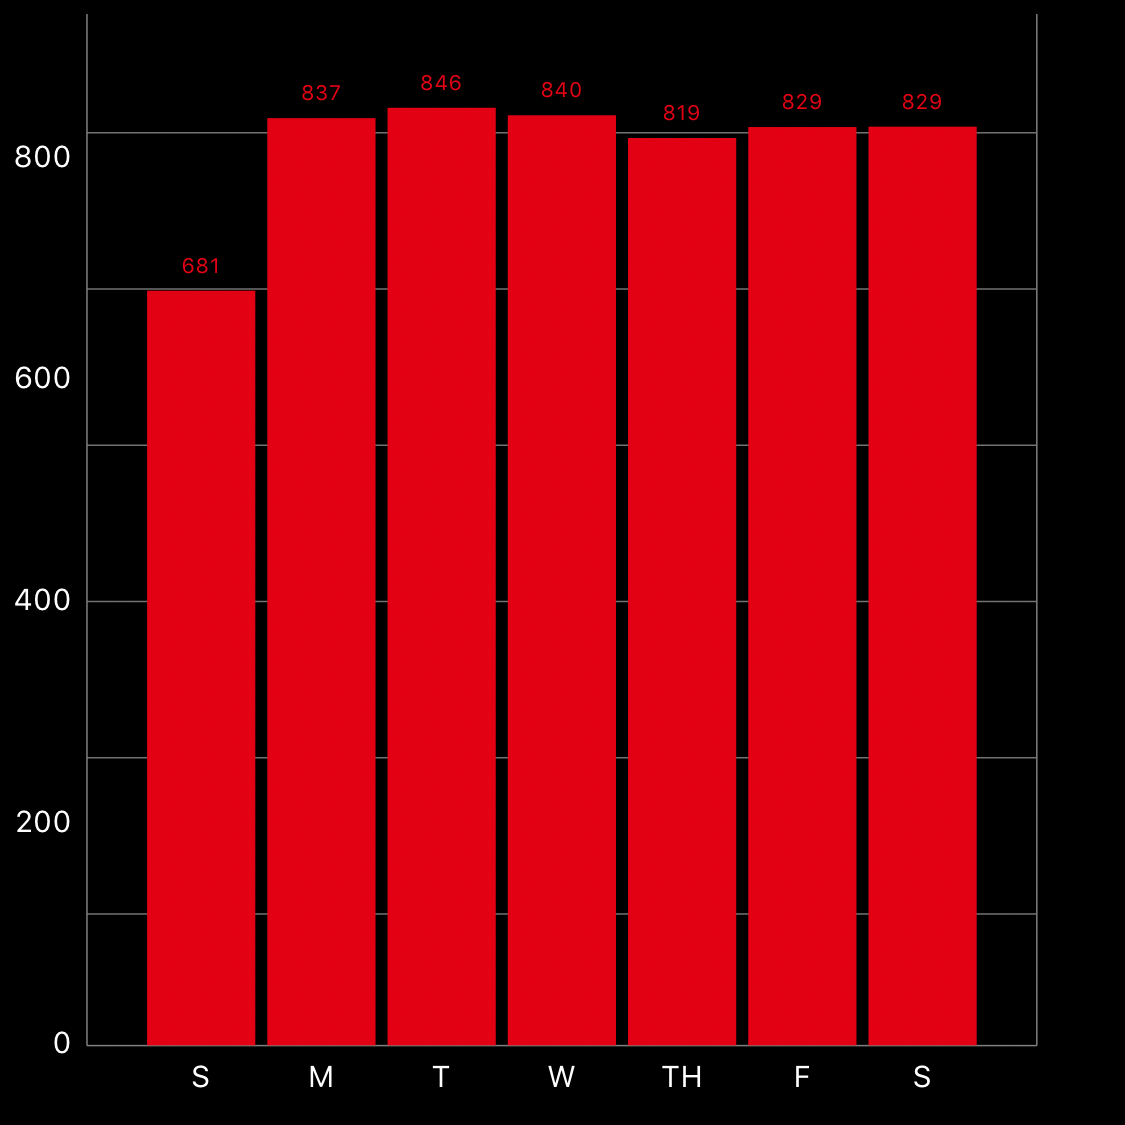 Activity chart data average throughout the week